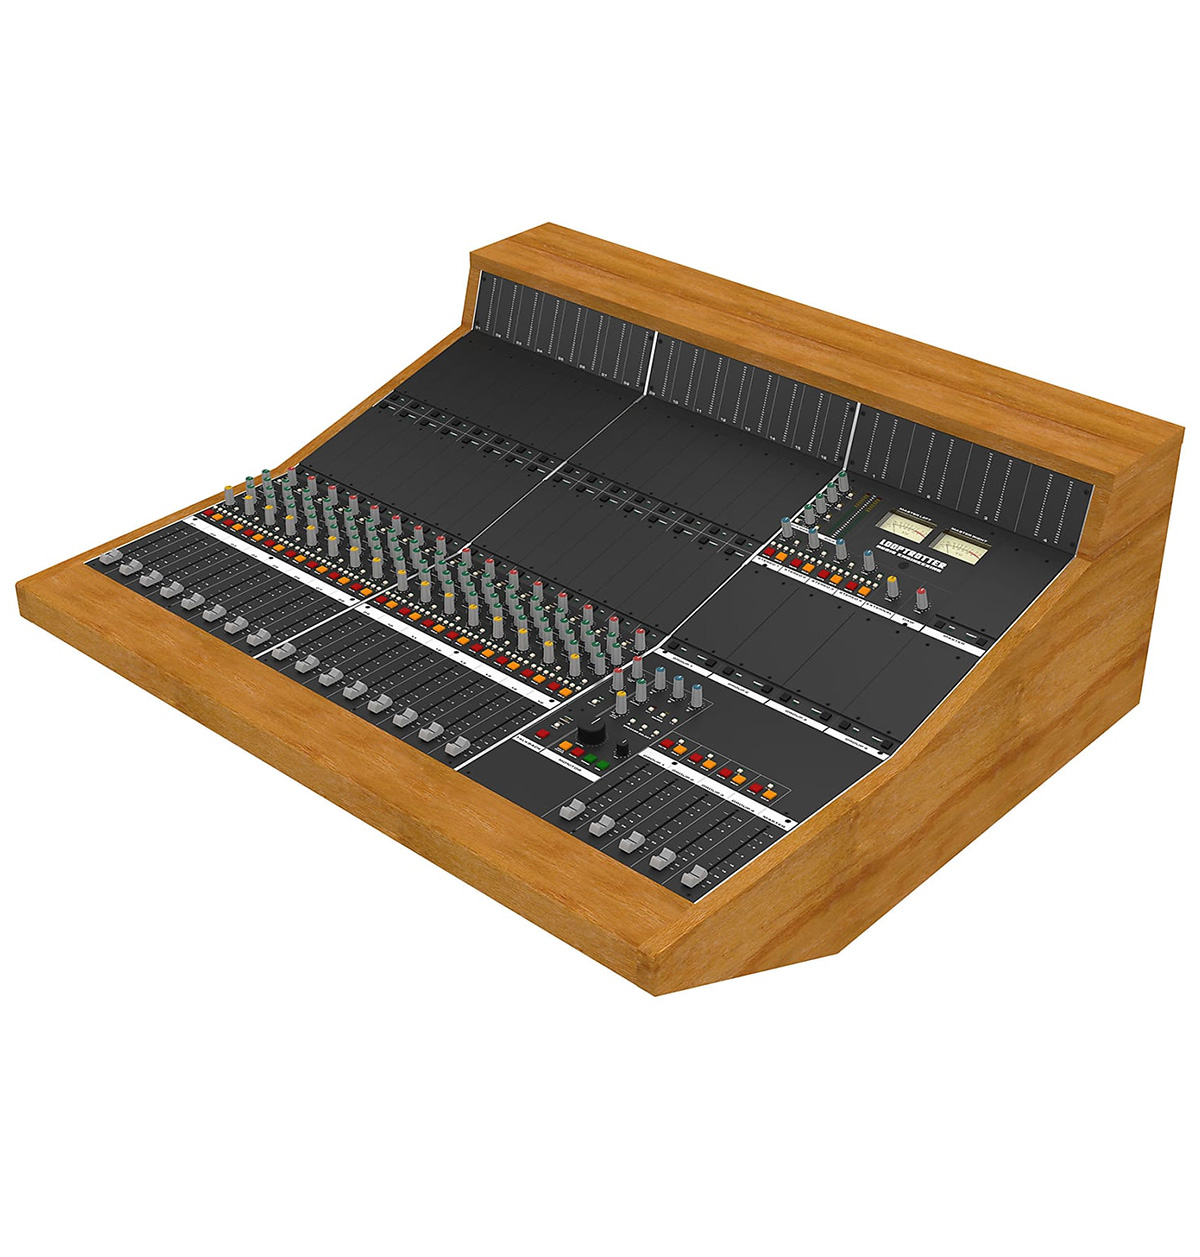 MÍXER ANALÓGICO 500 SERIES LOOPTROTTER MODULAR CONSOLE 16 CHANNEL